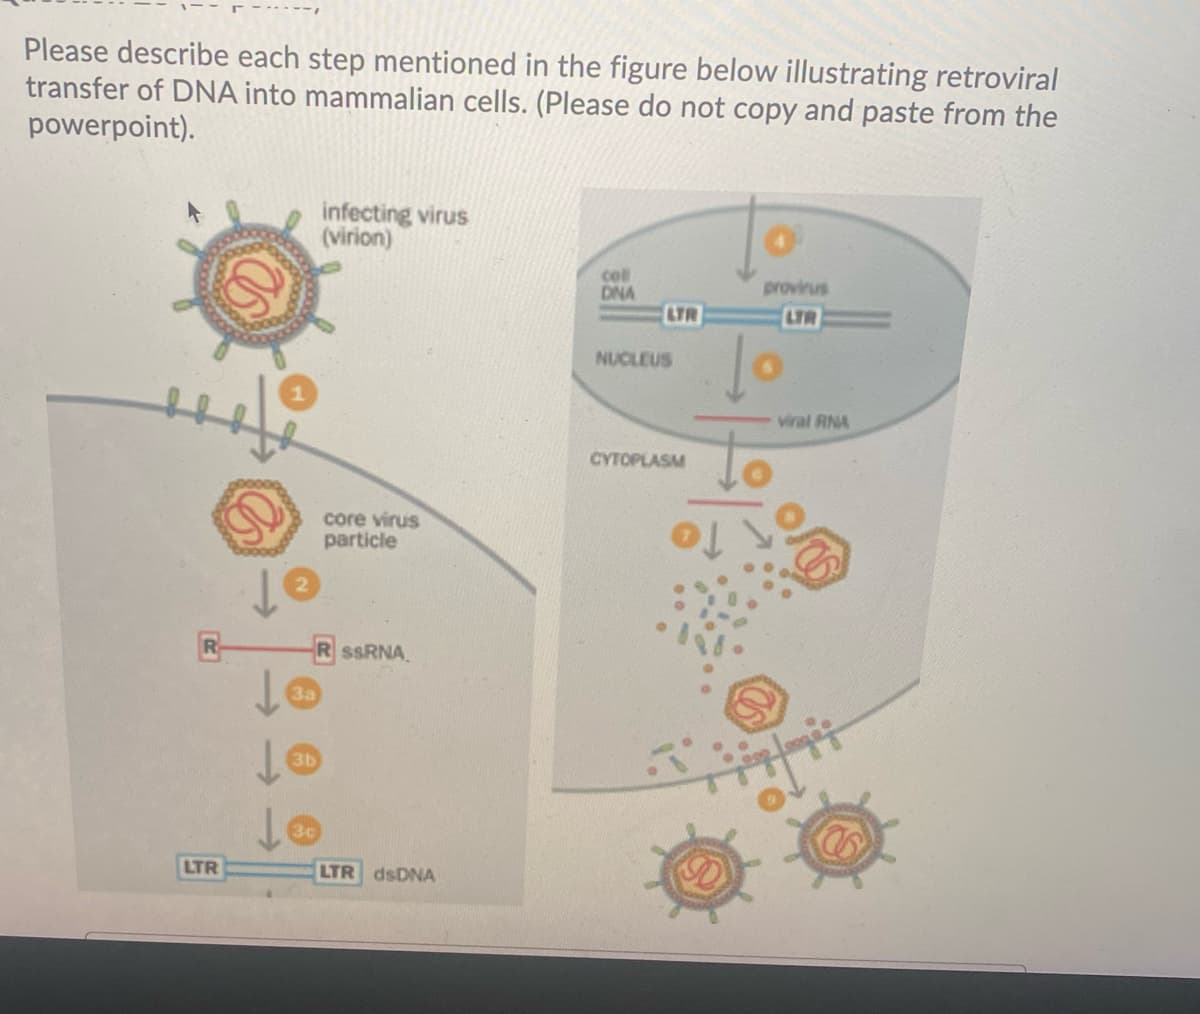 Please describe each step mentioned in the figure below illustrating retroviral
transfer of DNA into mammalian cells. (Please do not copy and paste from the
powerpoint).
infecting virus
(virion)
cel
DNA
provirus
LTR
LTR
NUCLEUS
viral RNA
CYTOPLASM
core virus
particle
R-
R SSRNA
3b
LTR
LTR DNA
